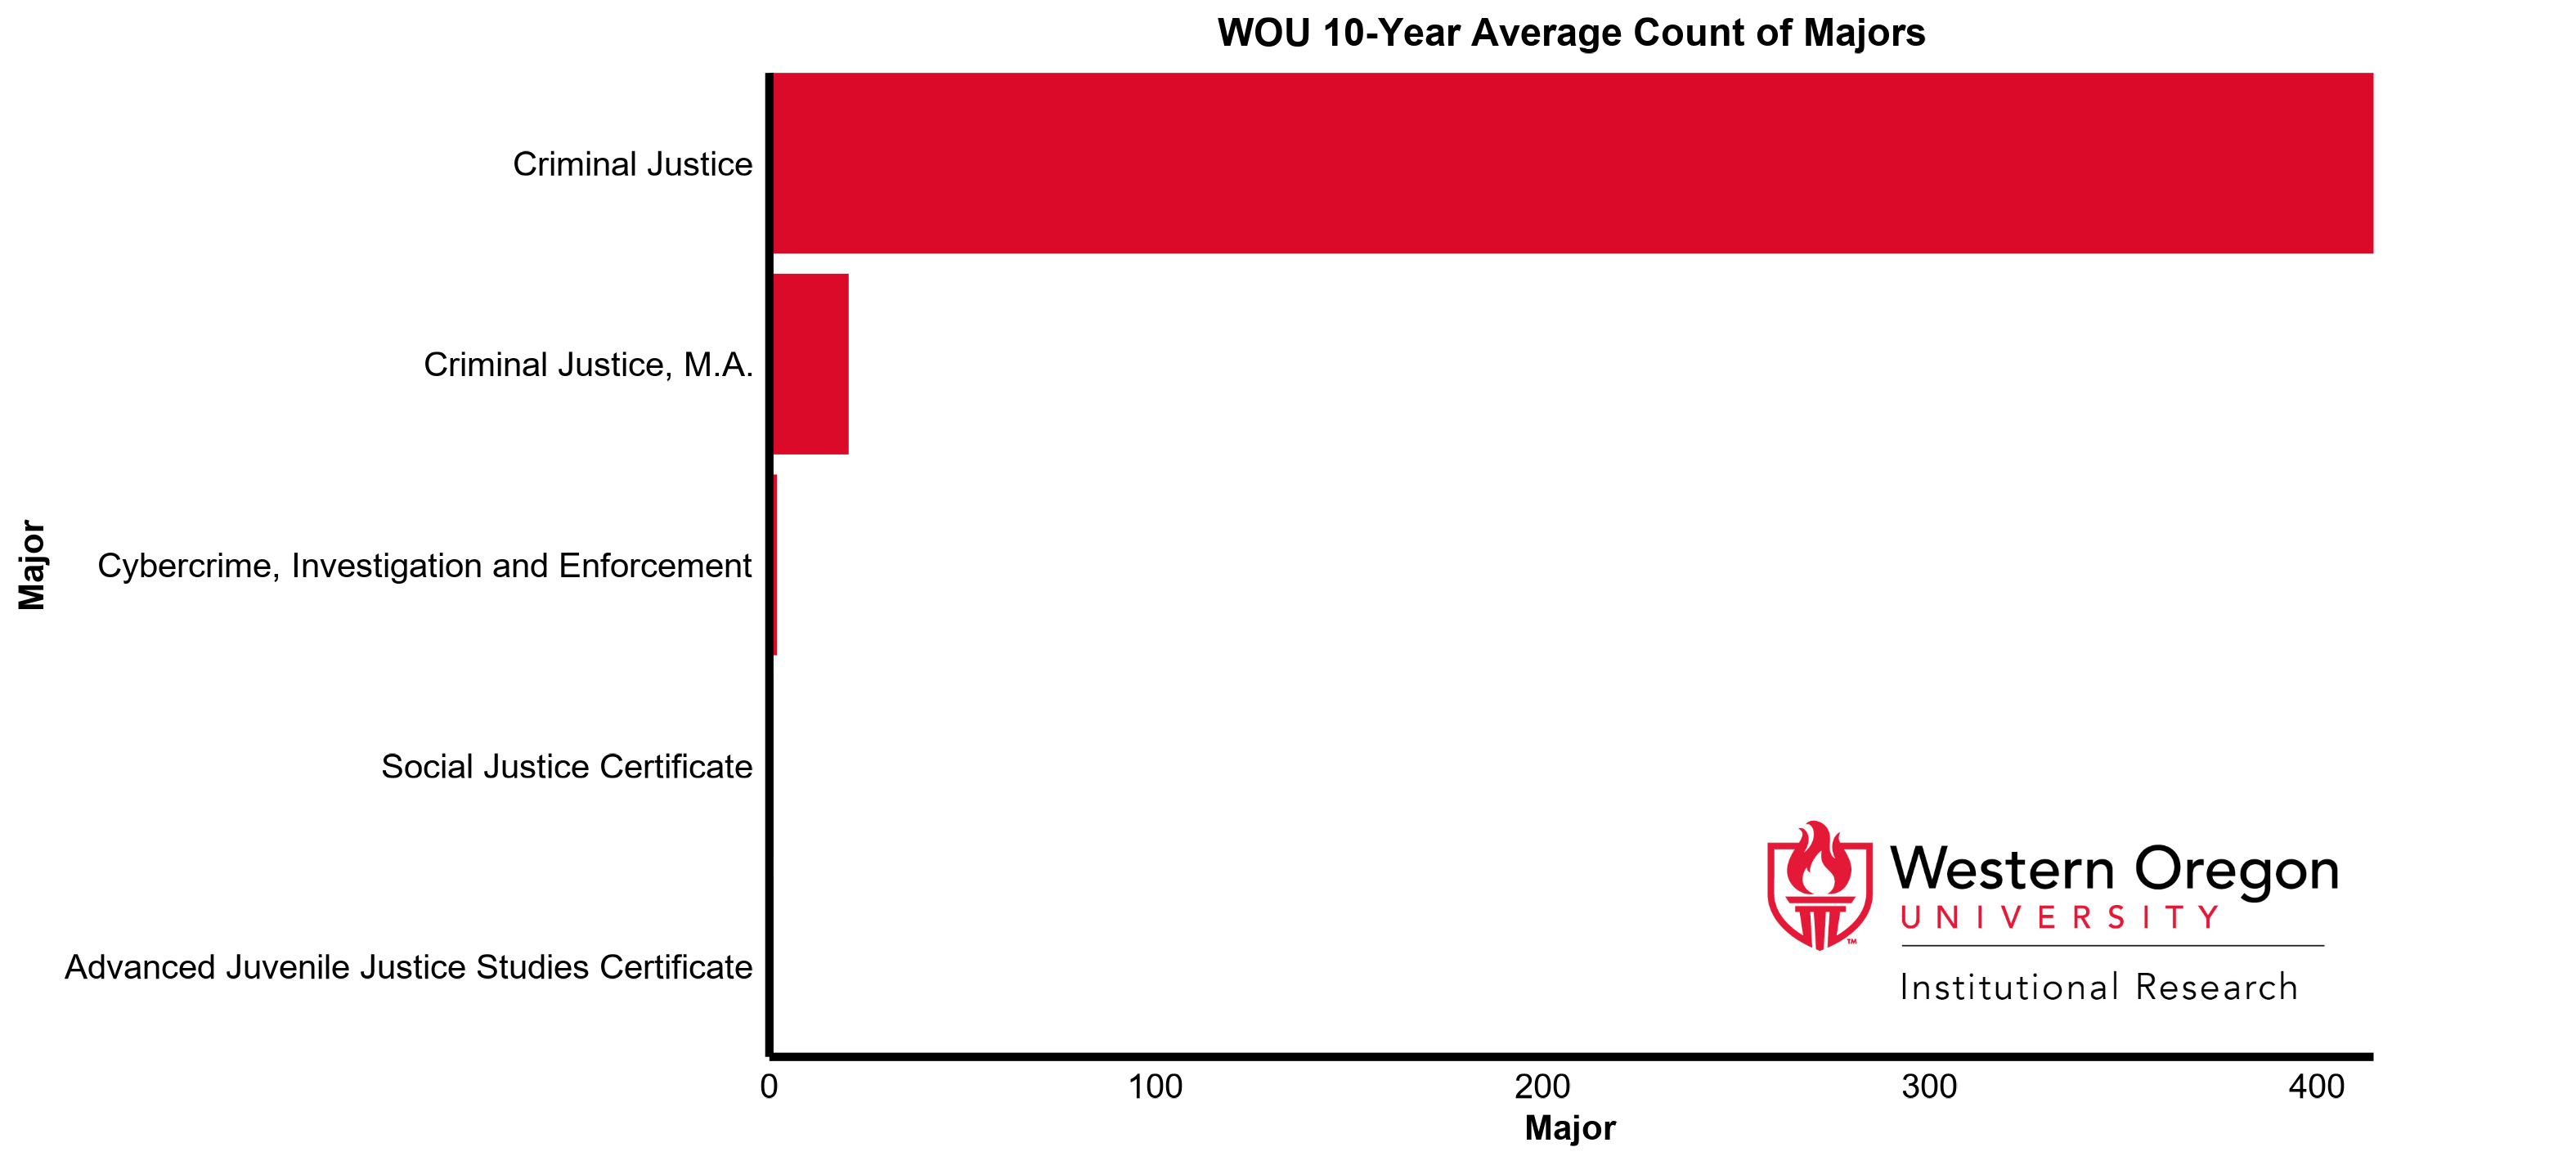 Bar graph of the 10-year average count of majors at WOU for the Criminal Justice Sciences division